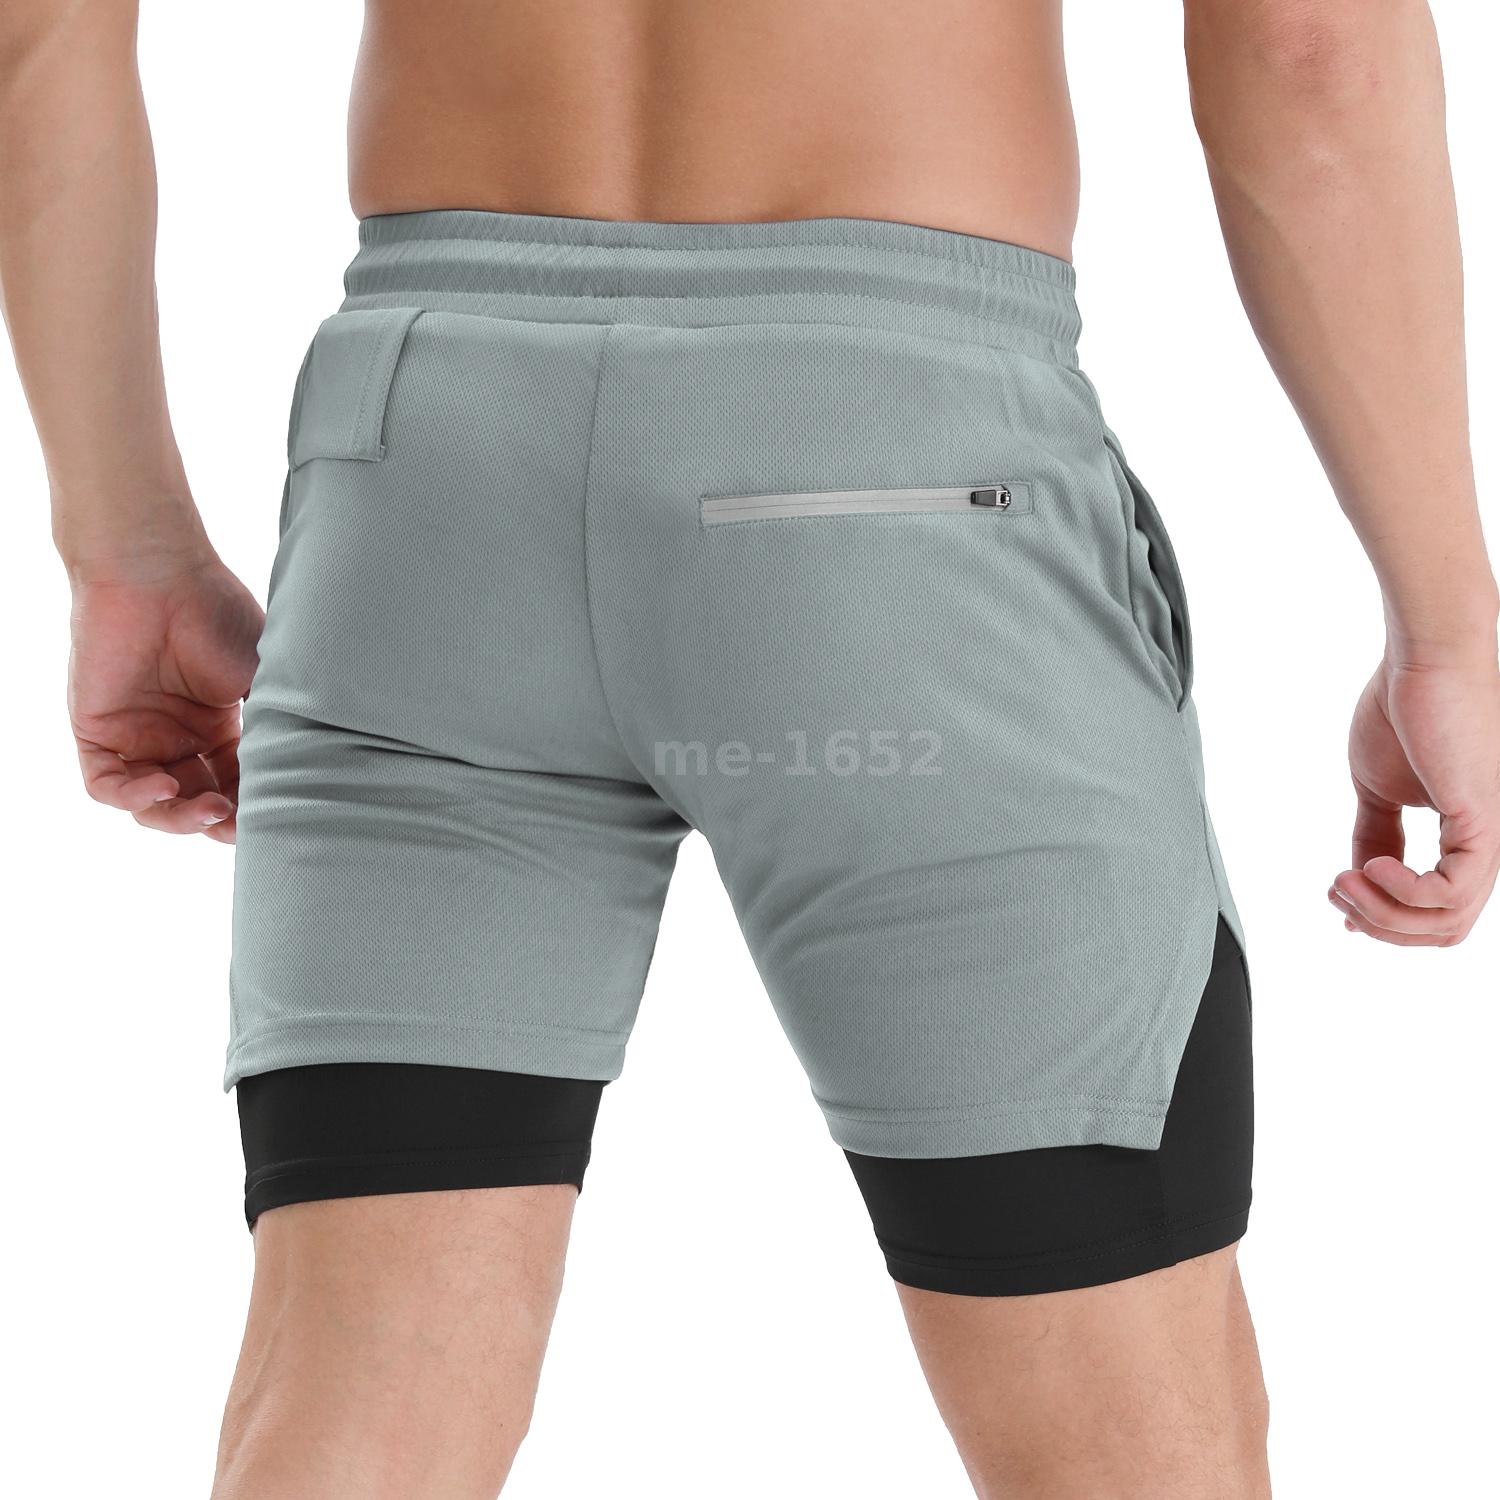 Lixada 2-in-1 Men Running Shorts with Towel Loop Quick Dry Exercise ...